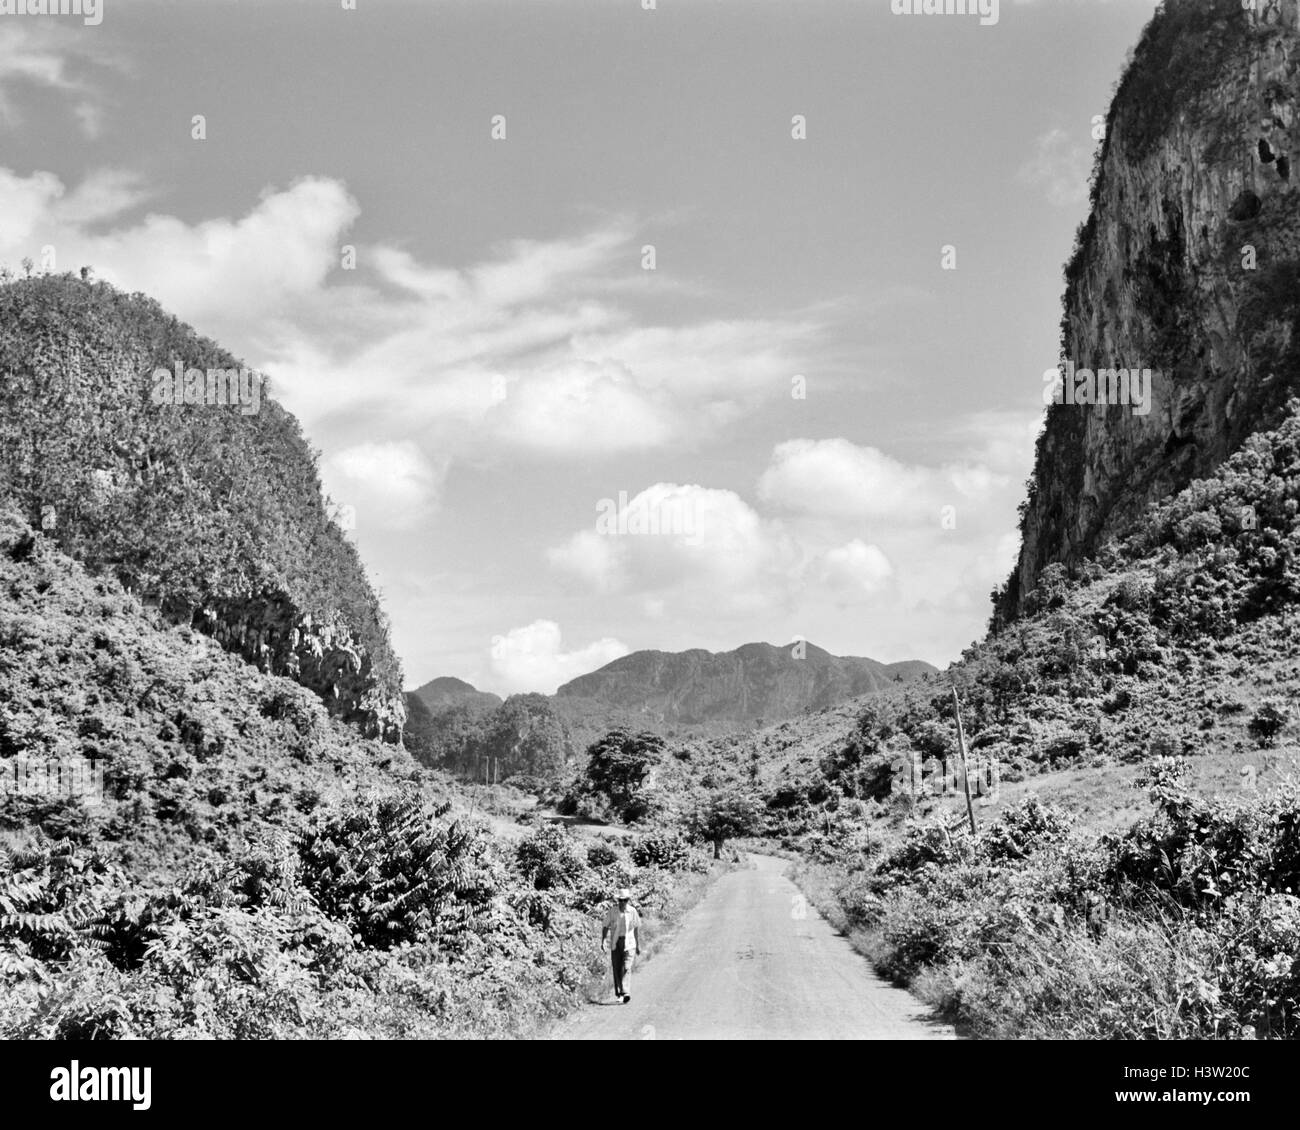 1950s RURAL ROAD OUTSIDE OF TOWN OF VINALES IN PINAR DEL RIO PROVINCE CUBA Stock Photo